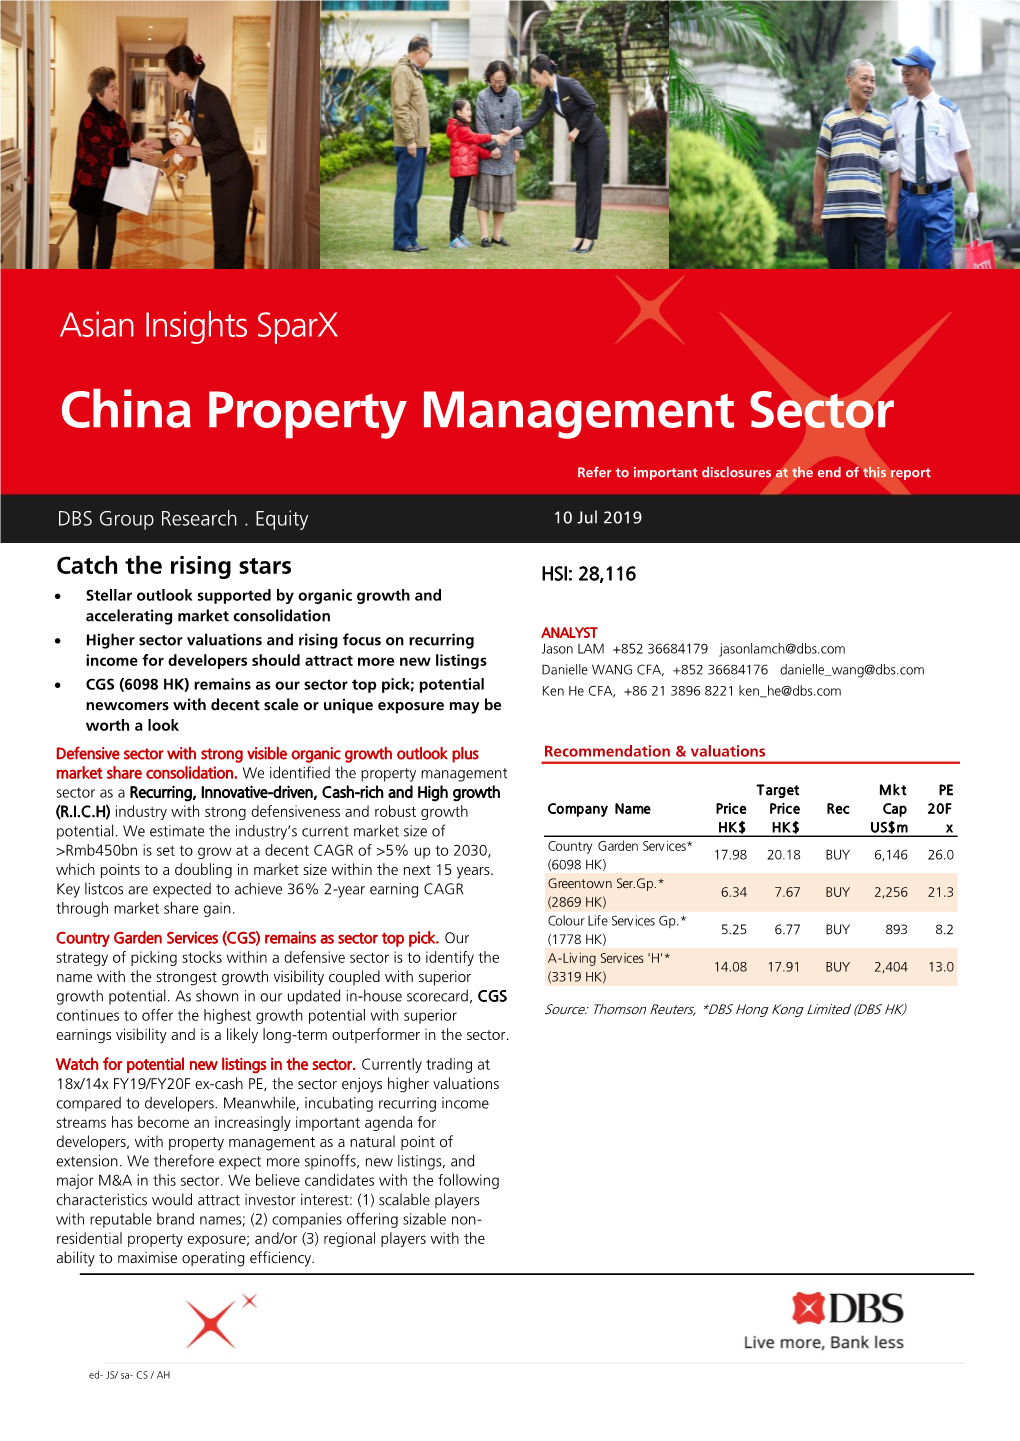 China Property Management Sector